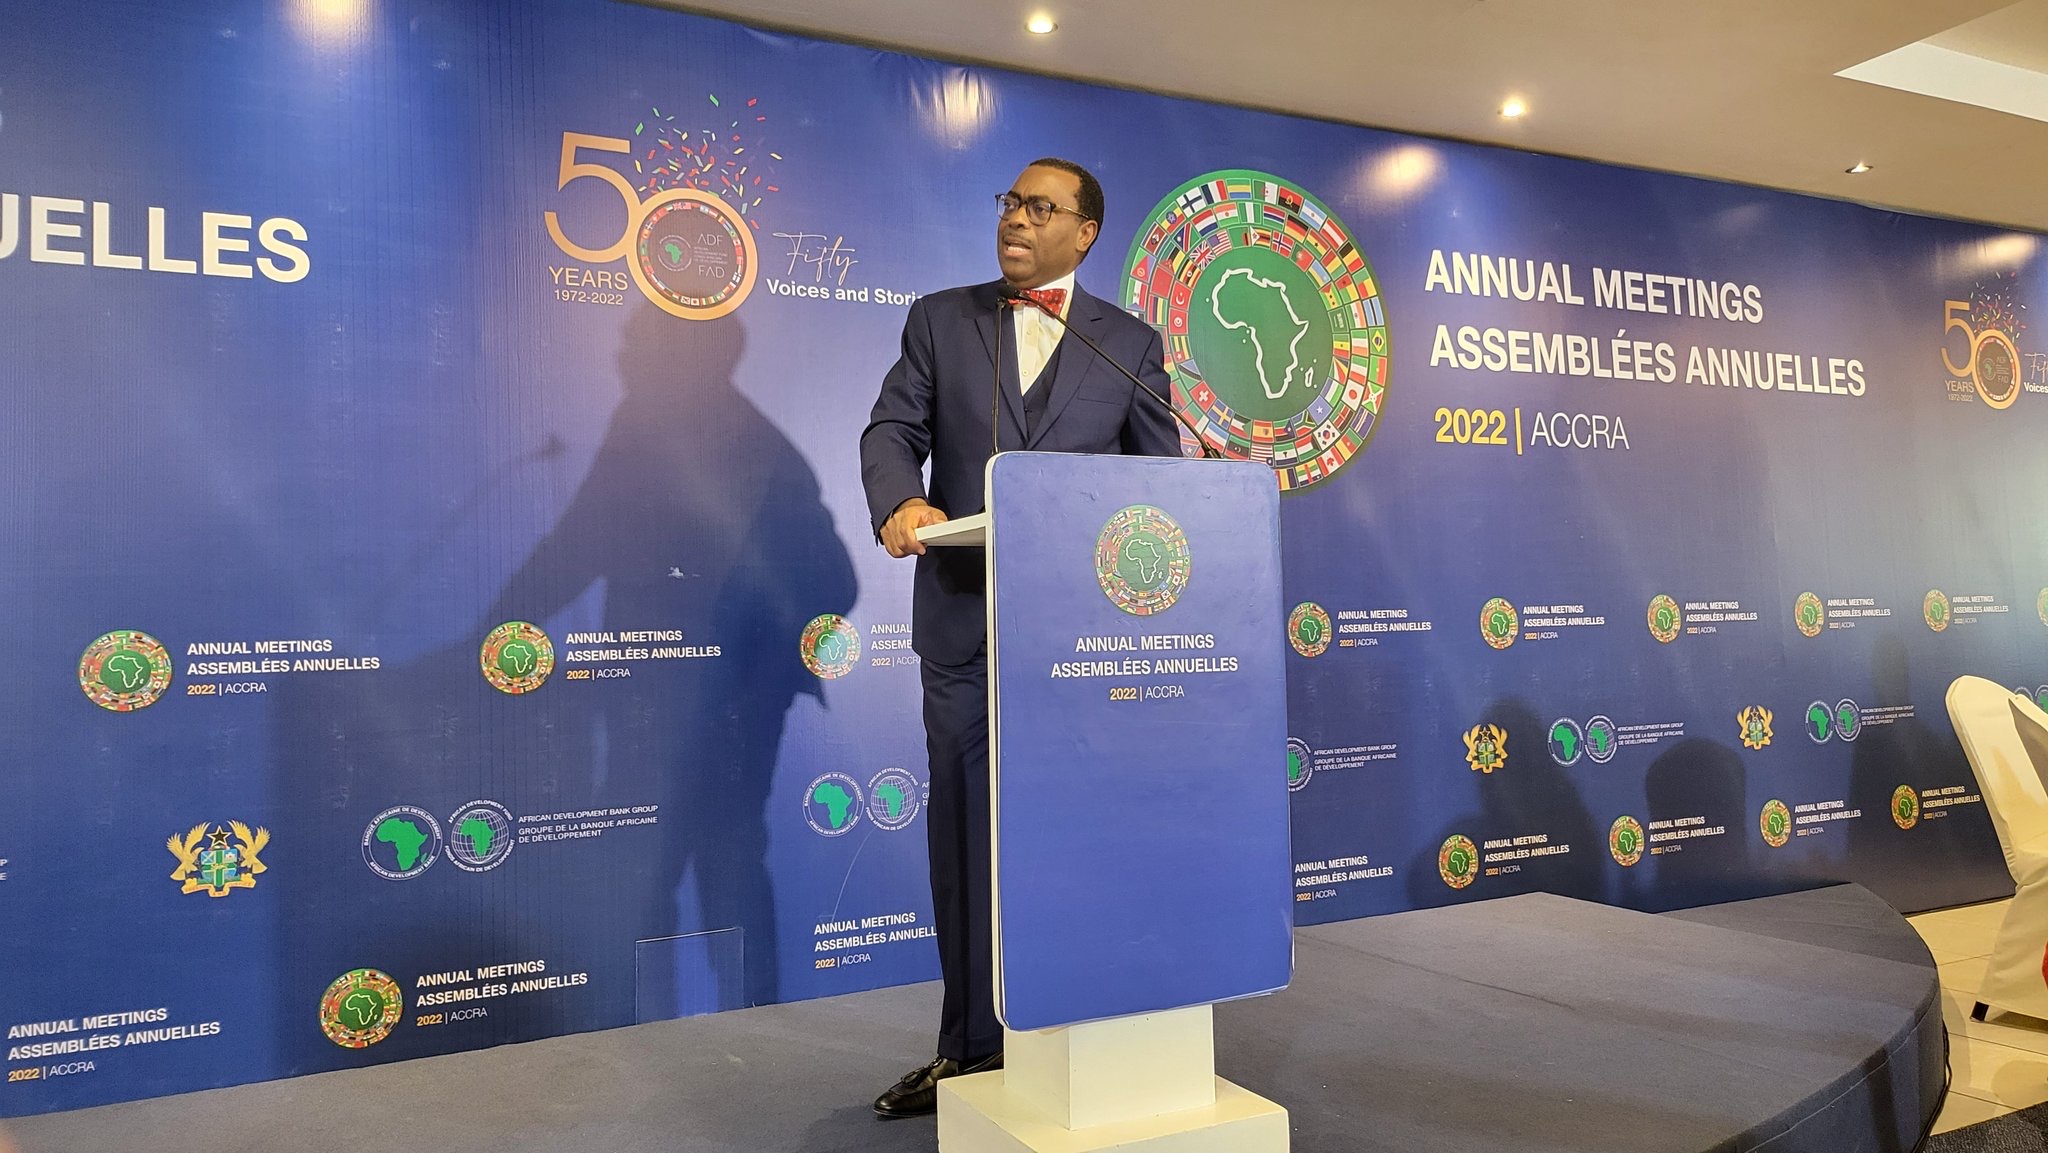 Akinwumi A. Adesina, President of African Development Bank Group delivers remarks in Accra in Ghana on May 23. Courtesy